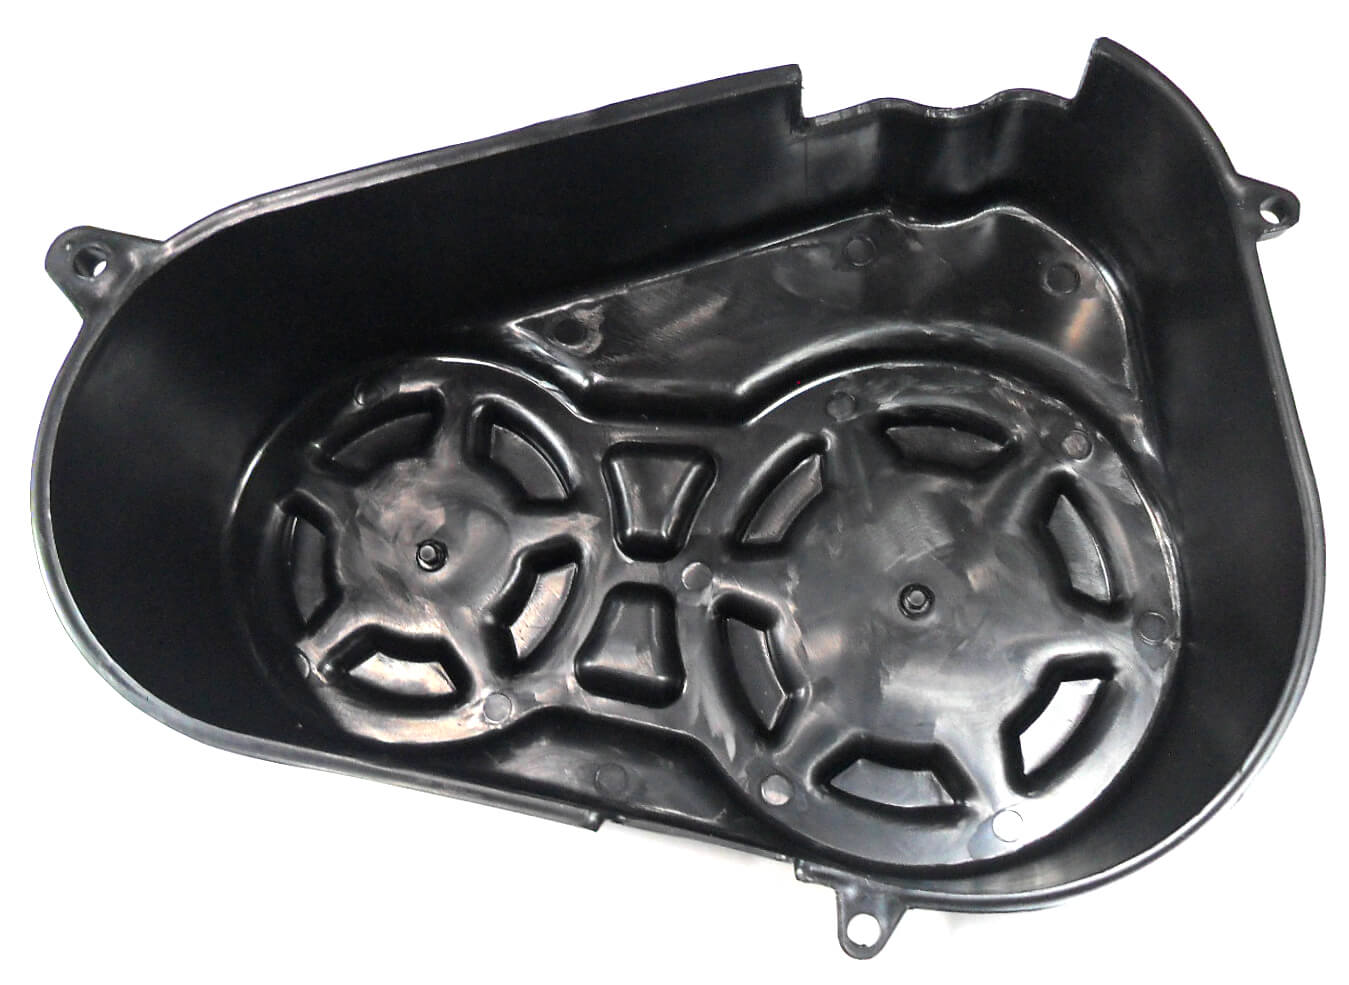 Clutch Belt Cover Fits Coleman KT196 GoKart + Others with 165-212cc engines.